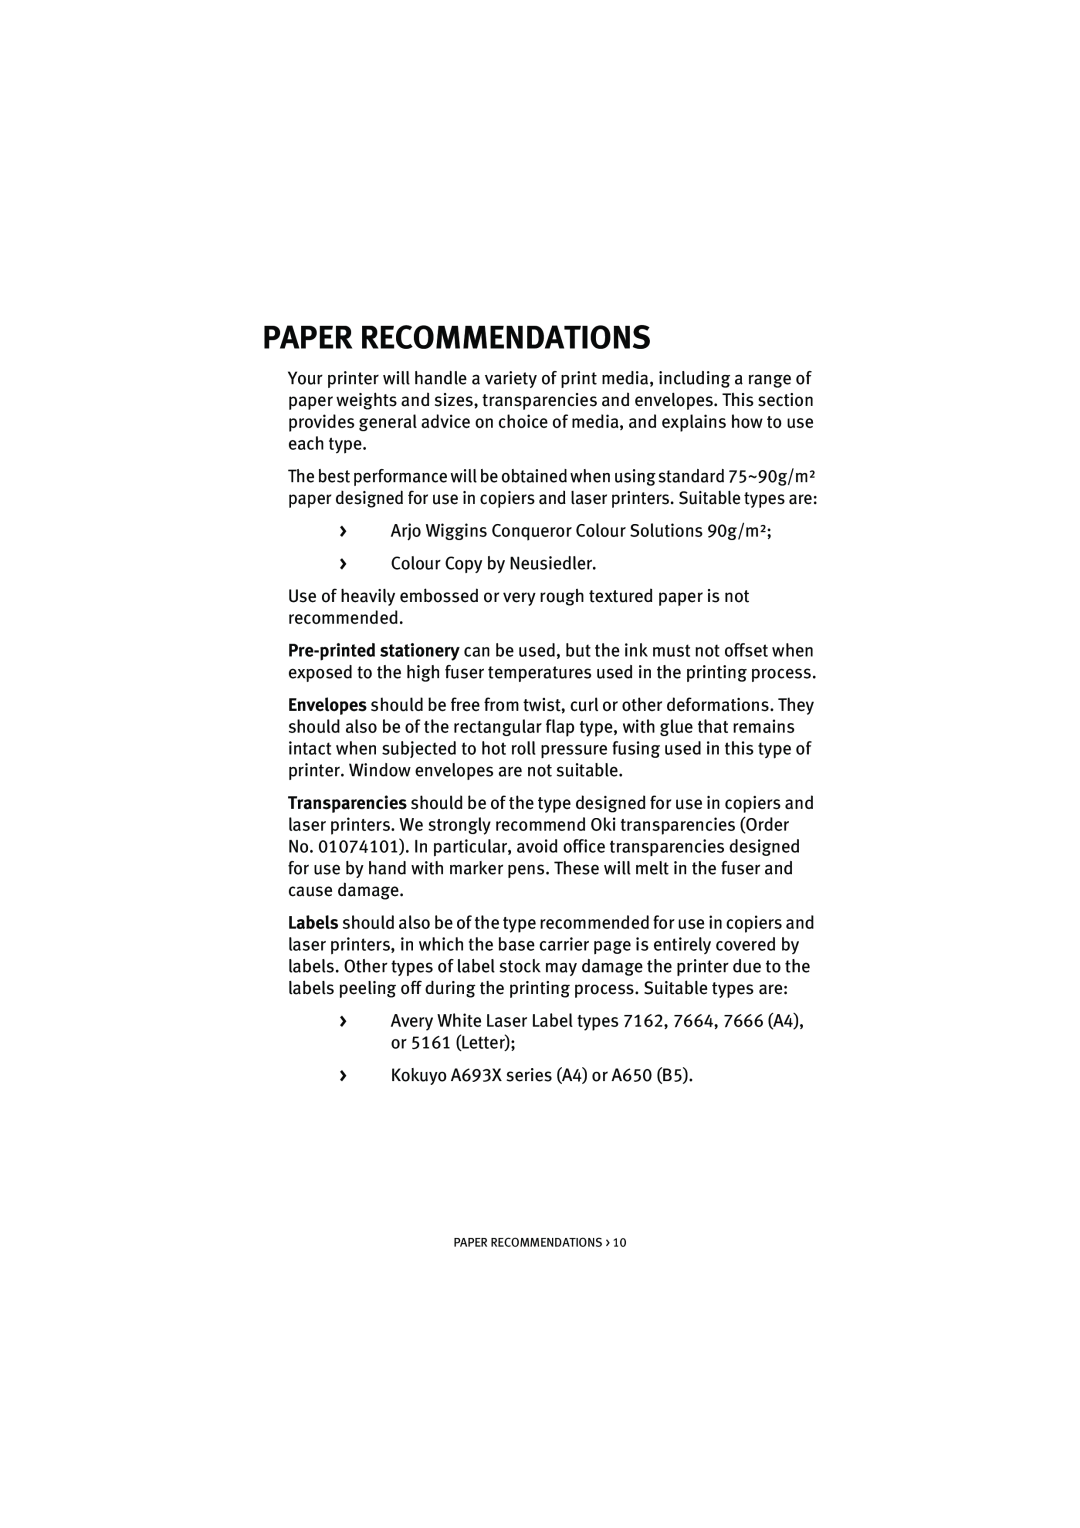 Oki 5200n manual Paper Recommendations 